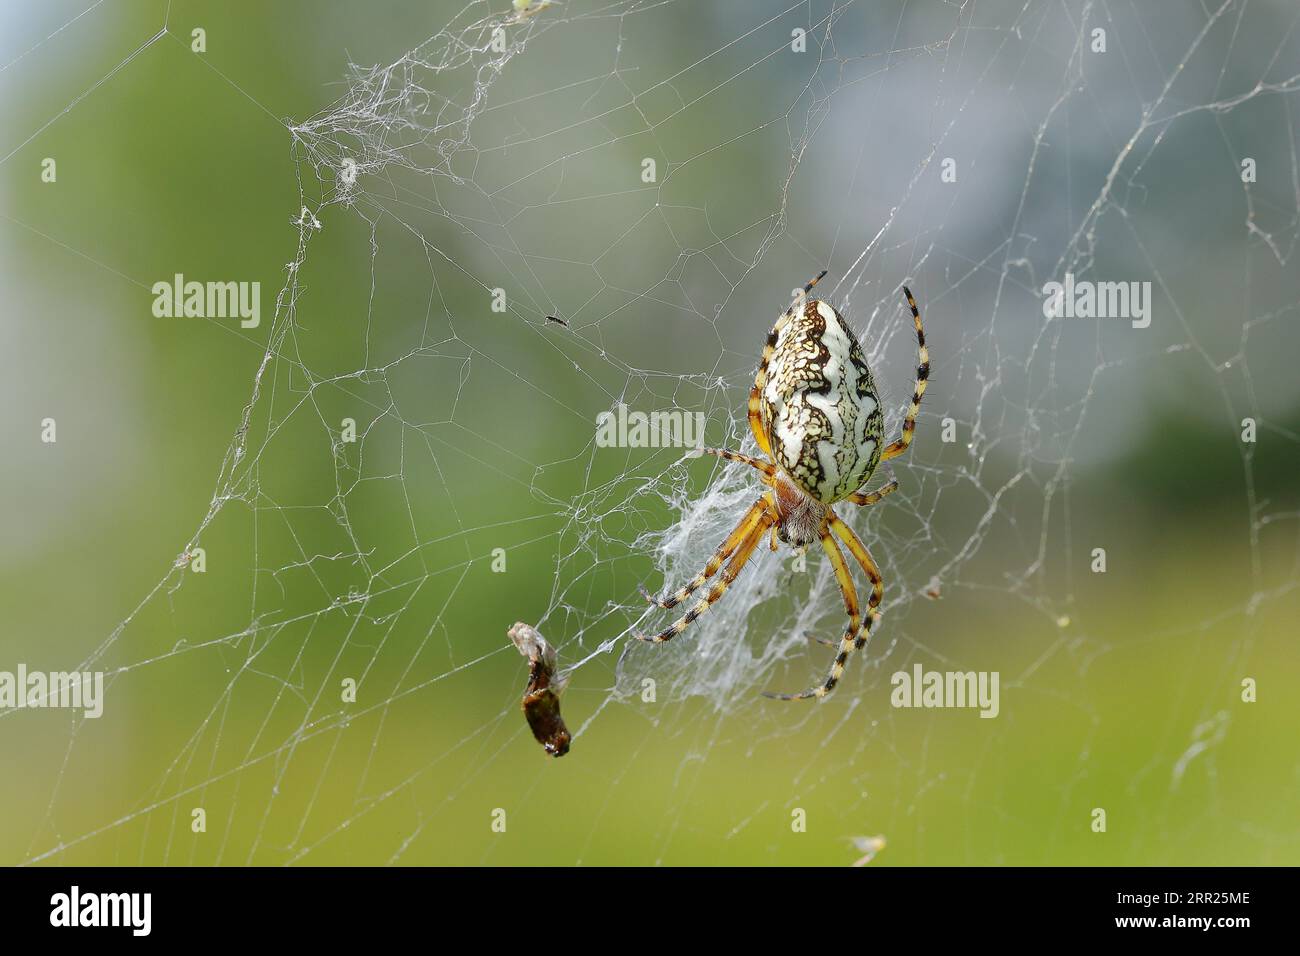 Oak leaf spider, also known as oak spider (Aculepeira ceropegia), with prey in web, Westerwald, Rhineland-Palatinate, Germany Stock Photo